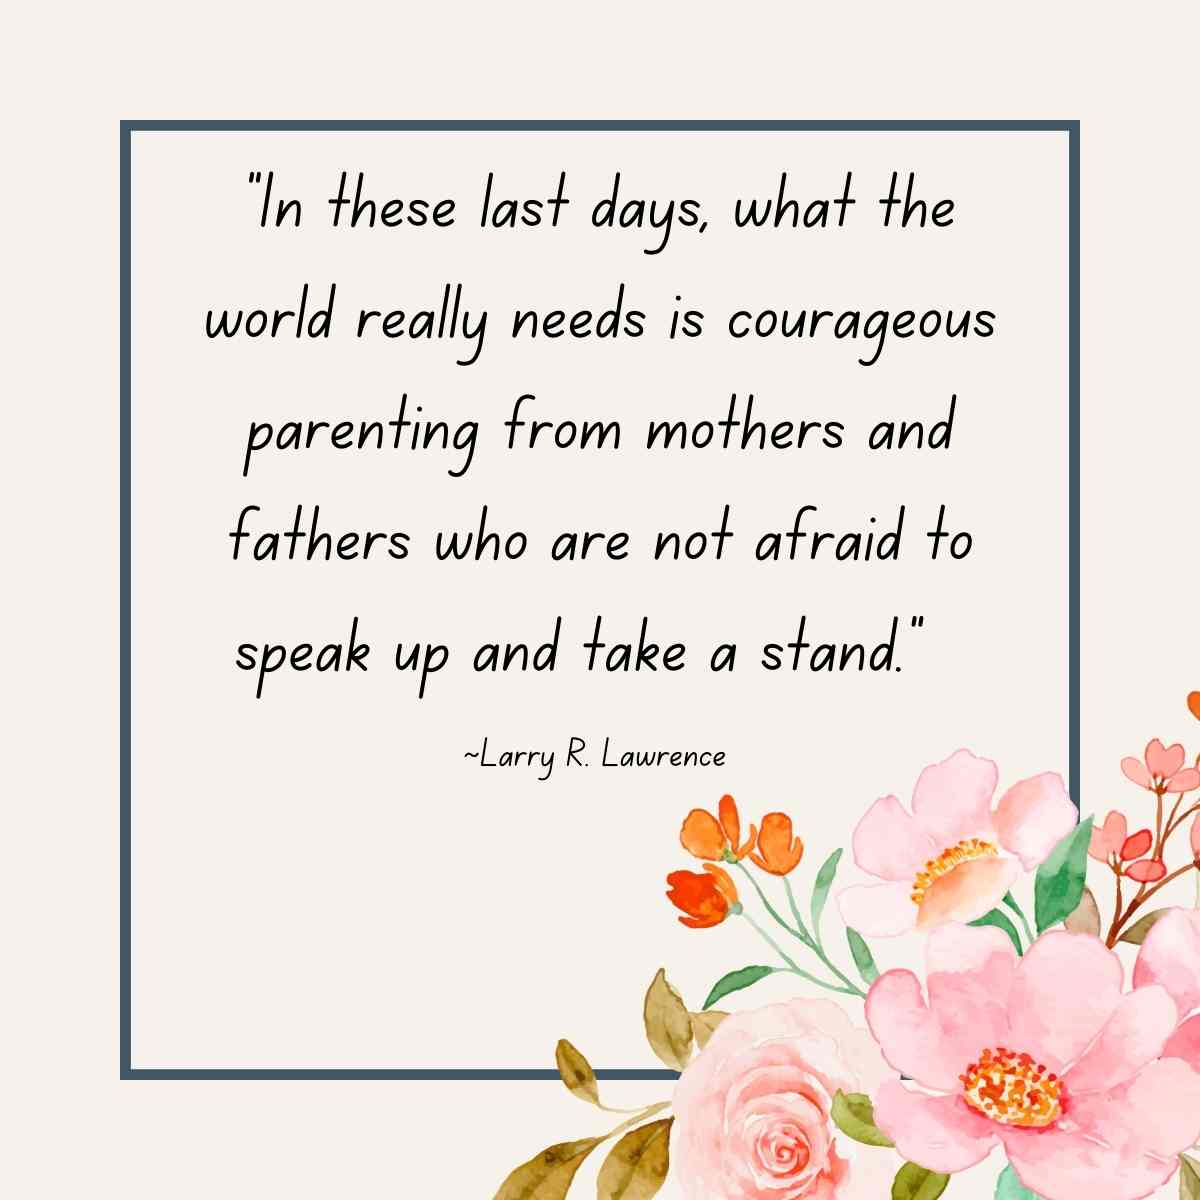 Quote by Larry R. Lawrence